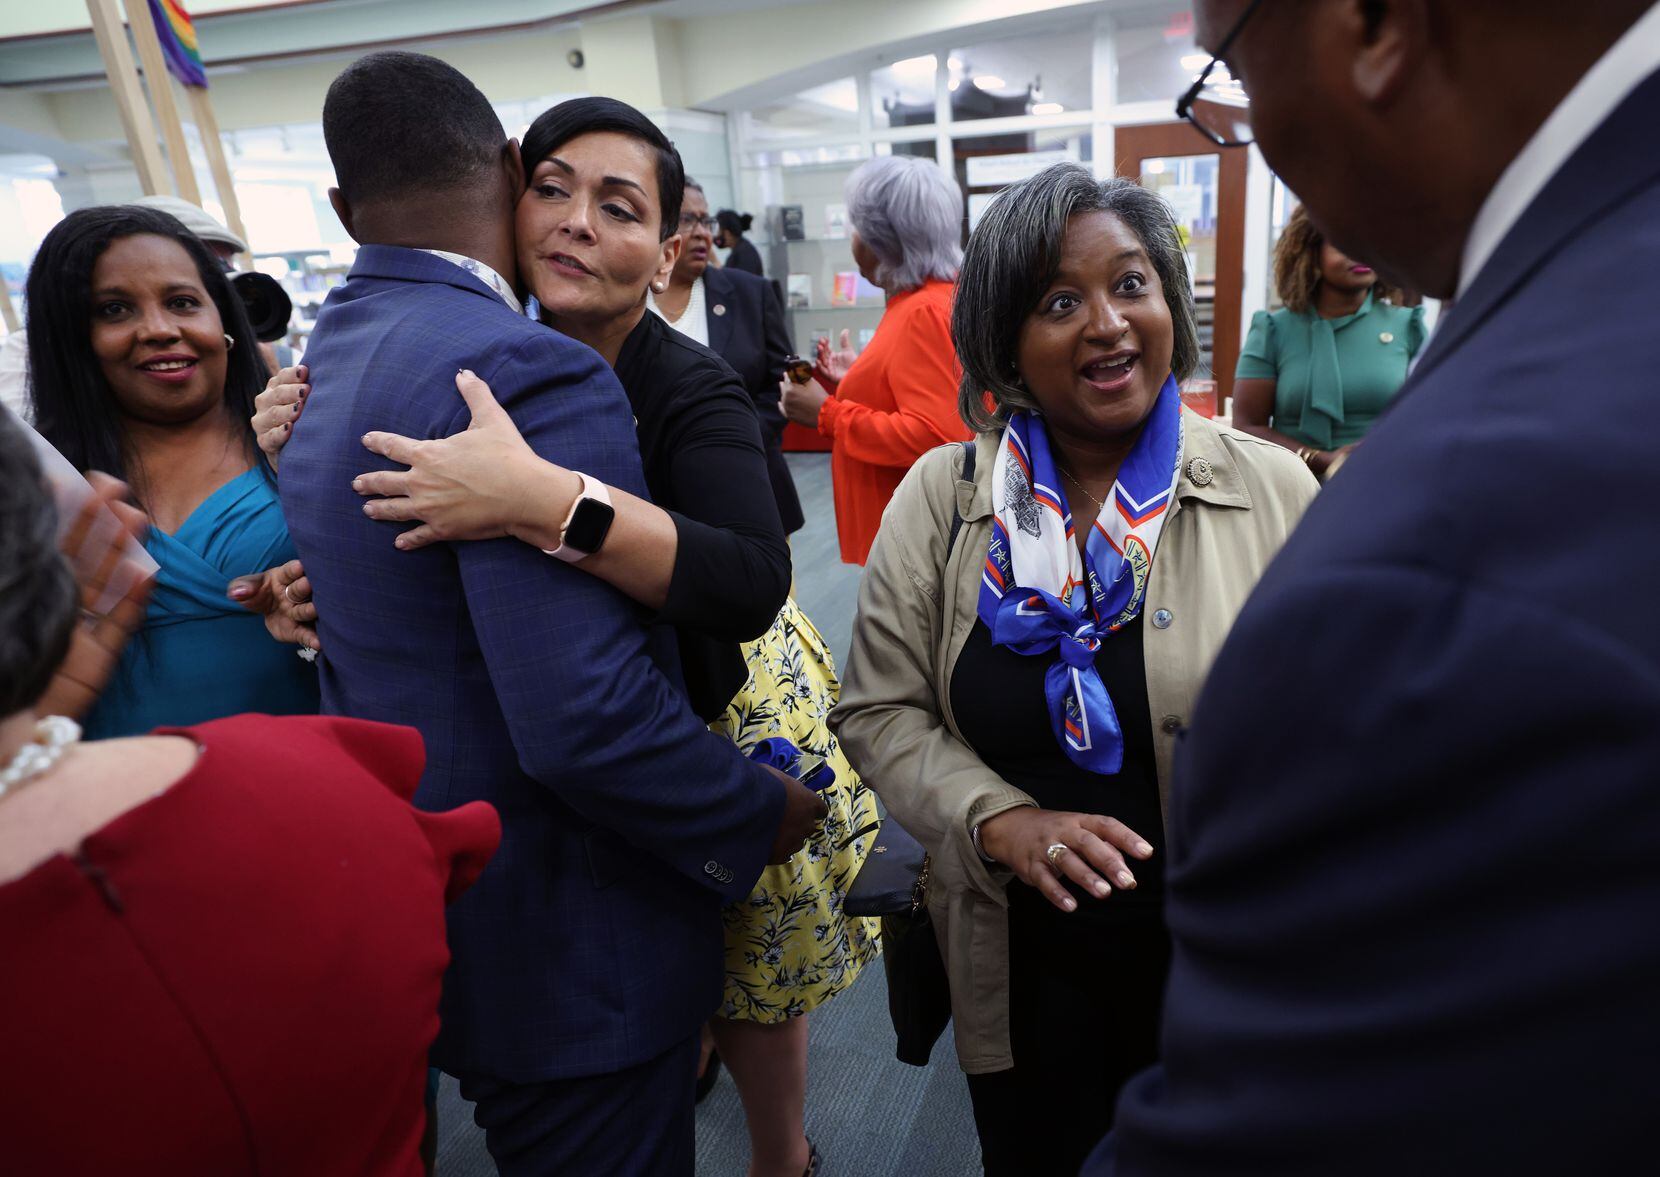 Texas State Rep. Rep. Rhetta Bowers (D-113) (R) talks to a fellow representative as Hala Ayala, Democratic nominee for Virginia lieutenant governor, greets another representative as they and other members of the Texas Legislative Black Caucus visit the Kate Waller Barrett Branch Library, the site of the 1939 Alexandria Library sit-in, where five Black men were arrested for attempting to register for a library card, on July 16, 2021 in Alexandria, Virginia. Members of Texas House Democratic Caucus continue to lobby for voting rights reform in Washington, DC after leaving Texas to block a voting restrictions bill by denying a Republican quorum.